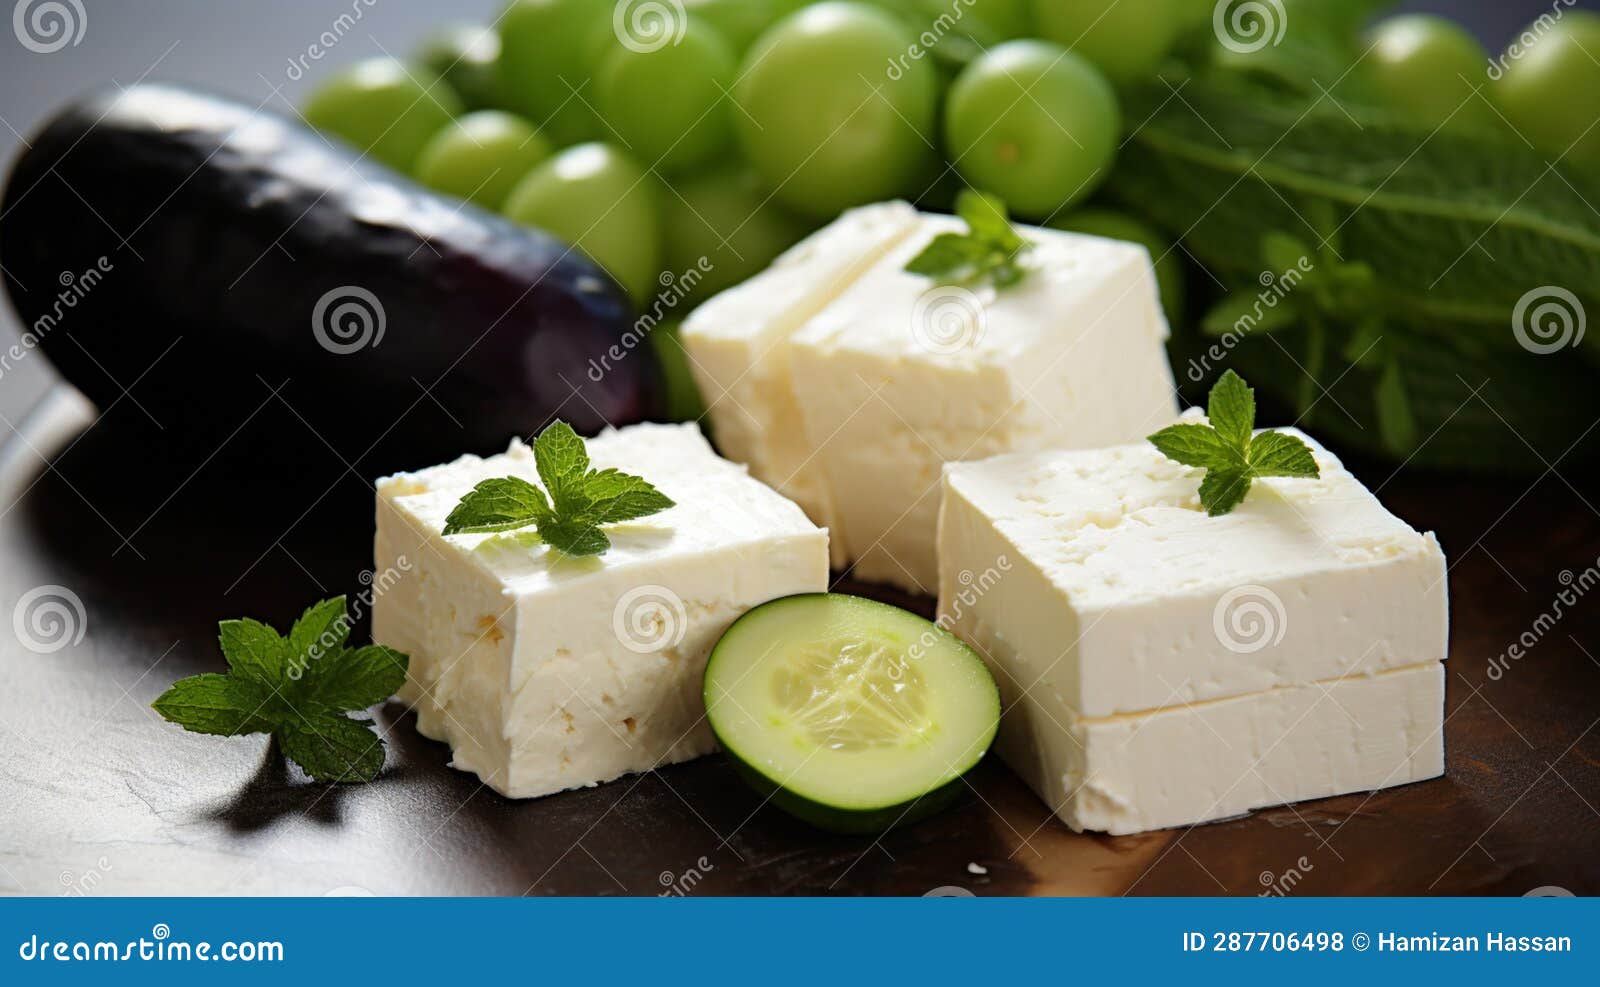 feta cheese: a crumbly treasure in snowy white. its briny notes dance with a creamy essence